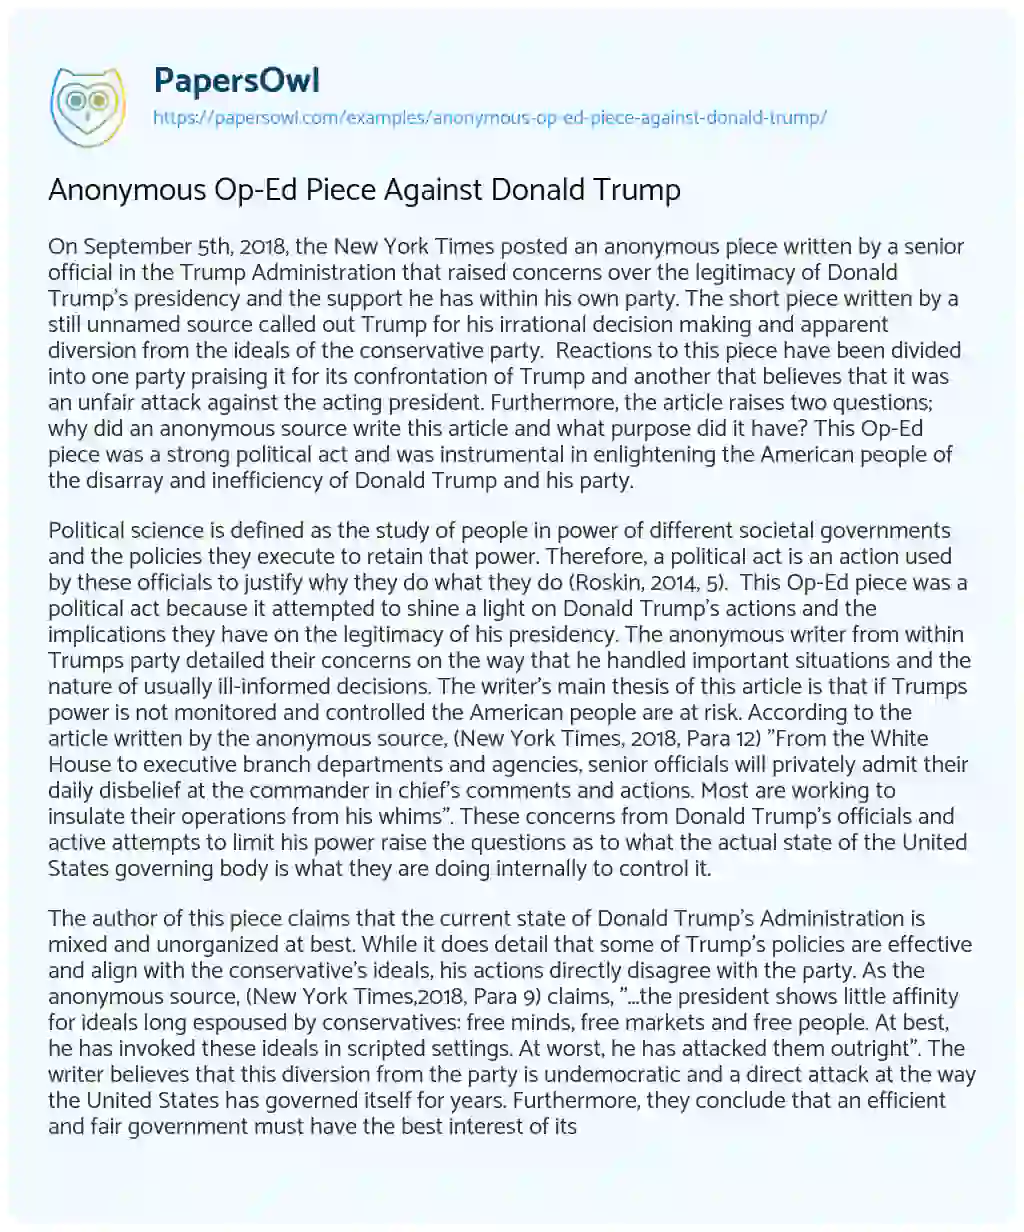 Essay on Anonymous Op-Ed Piece against Donald Trump